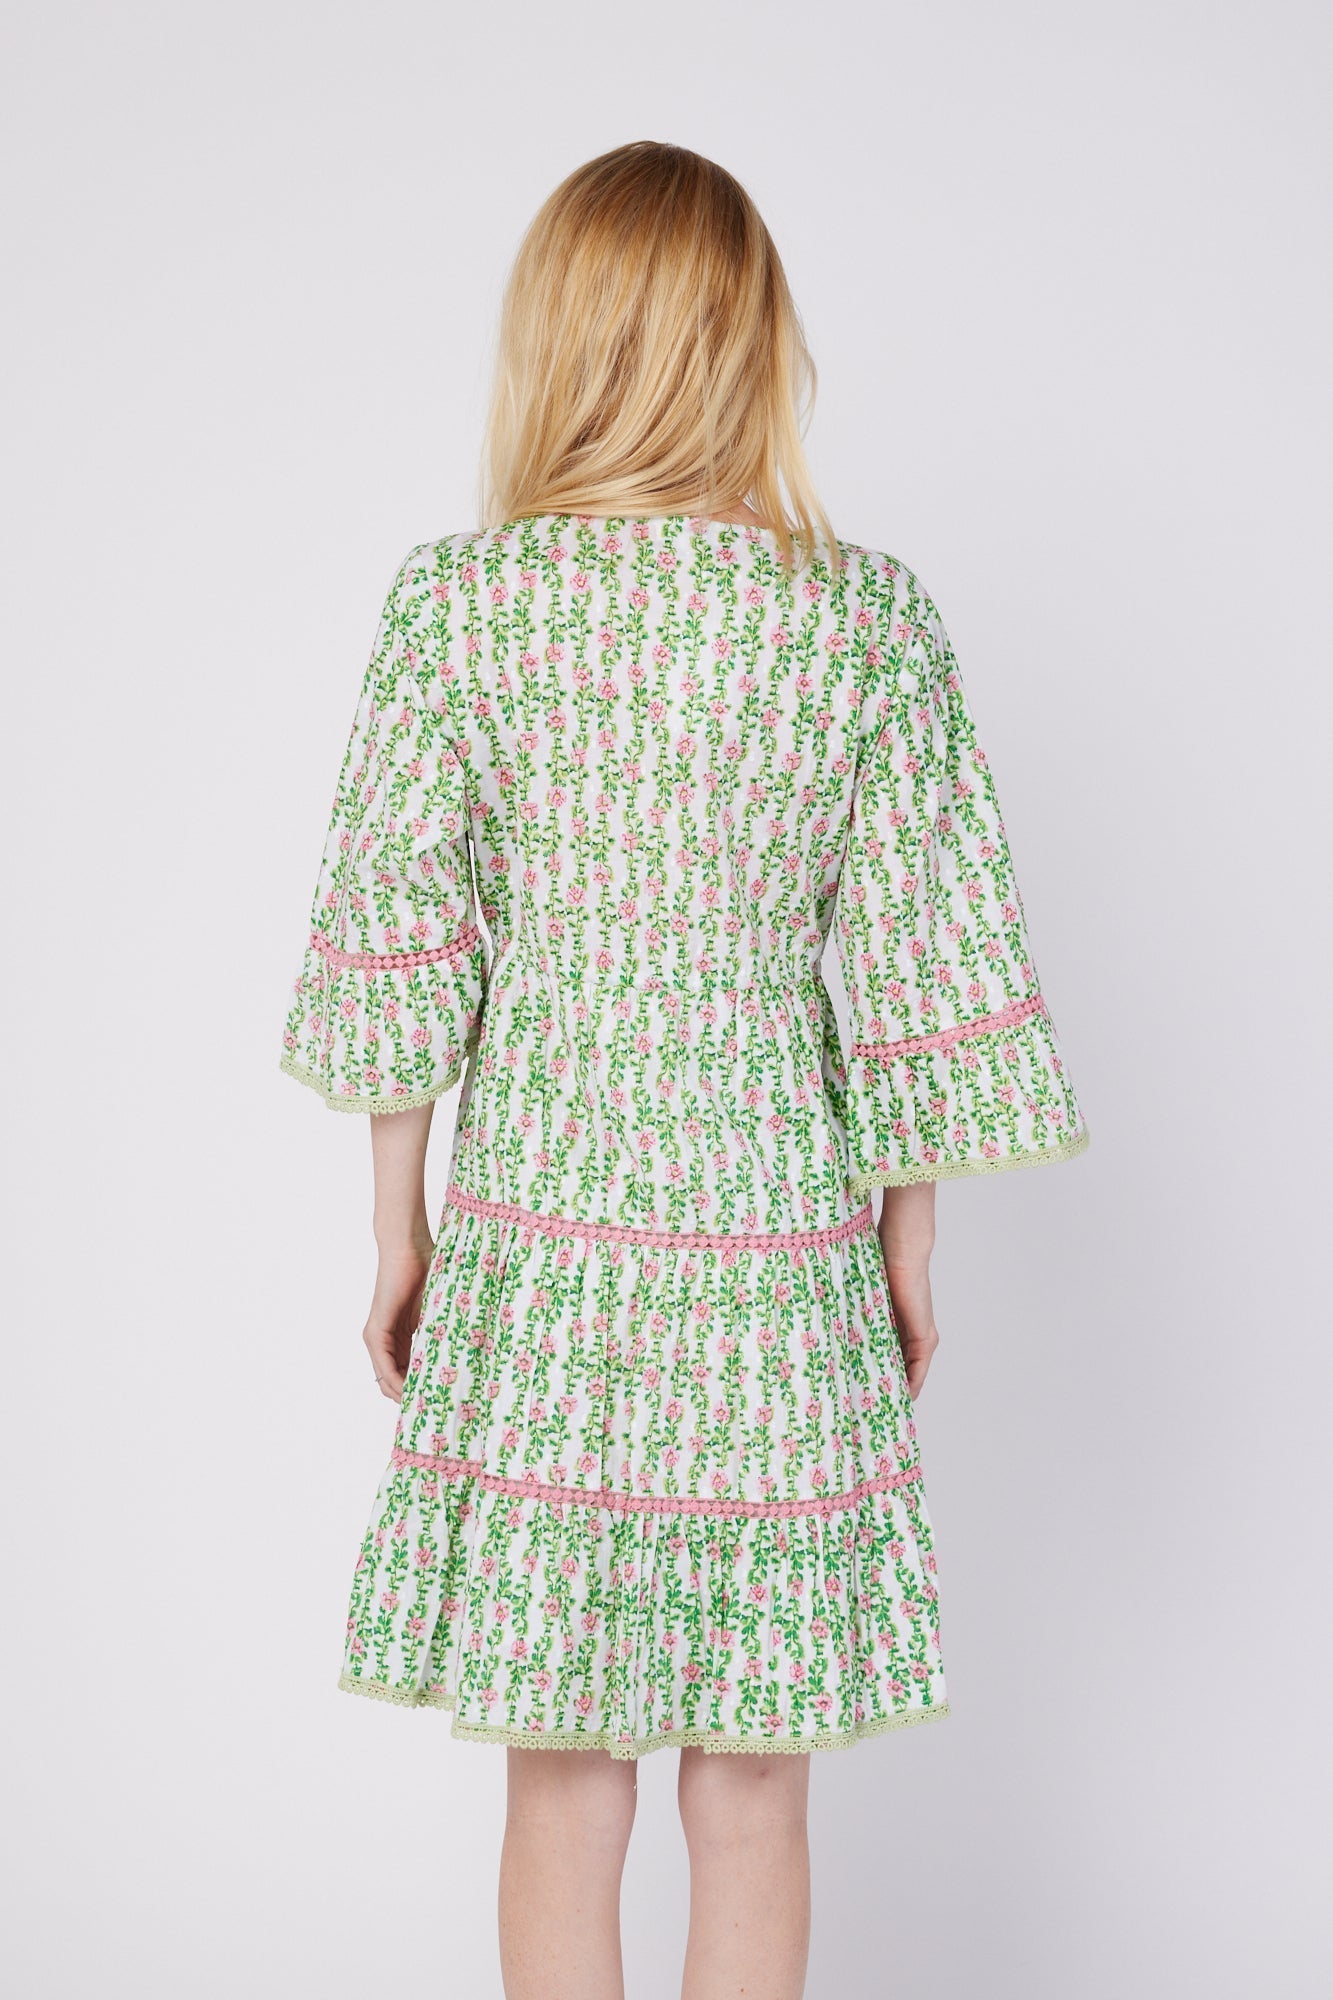 ModaPosa Desideria 3/4 Frill Sleeve Drawstring Empire Knee Length Dress in Spring Garden . Discover women's resort dresses and lifestyle clothing inspired by the Mediterranean. Free worldwide shipping available!